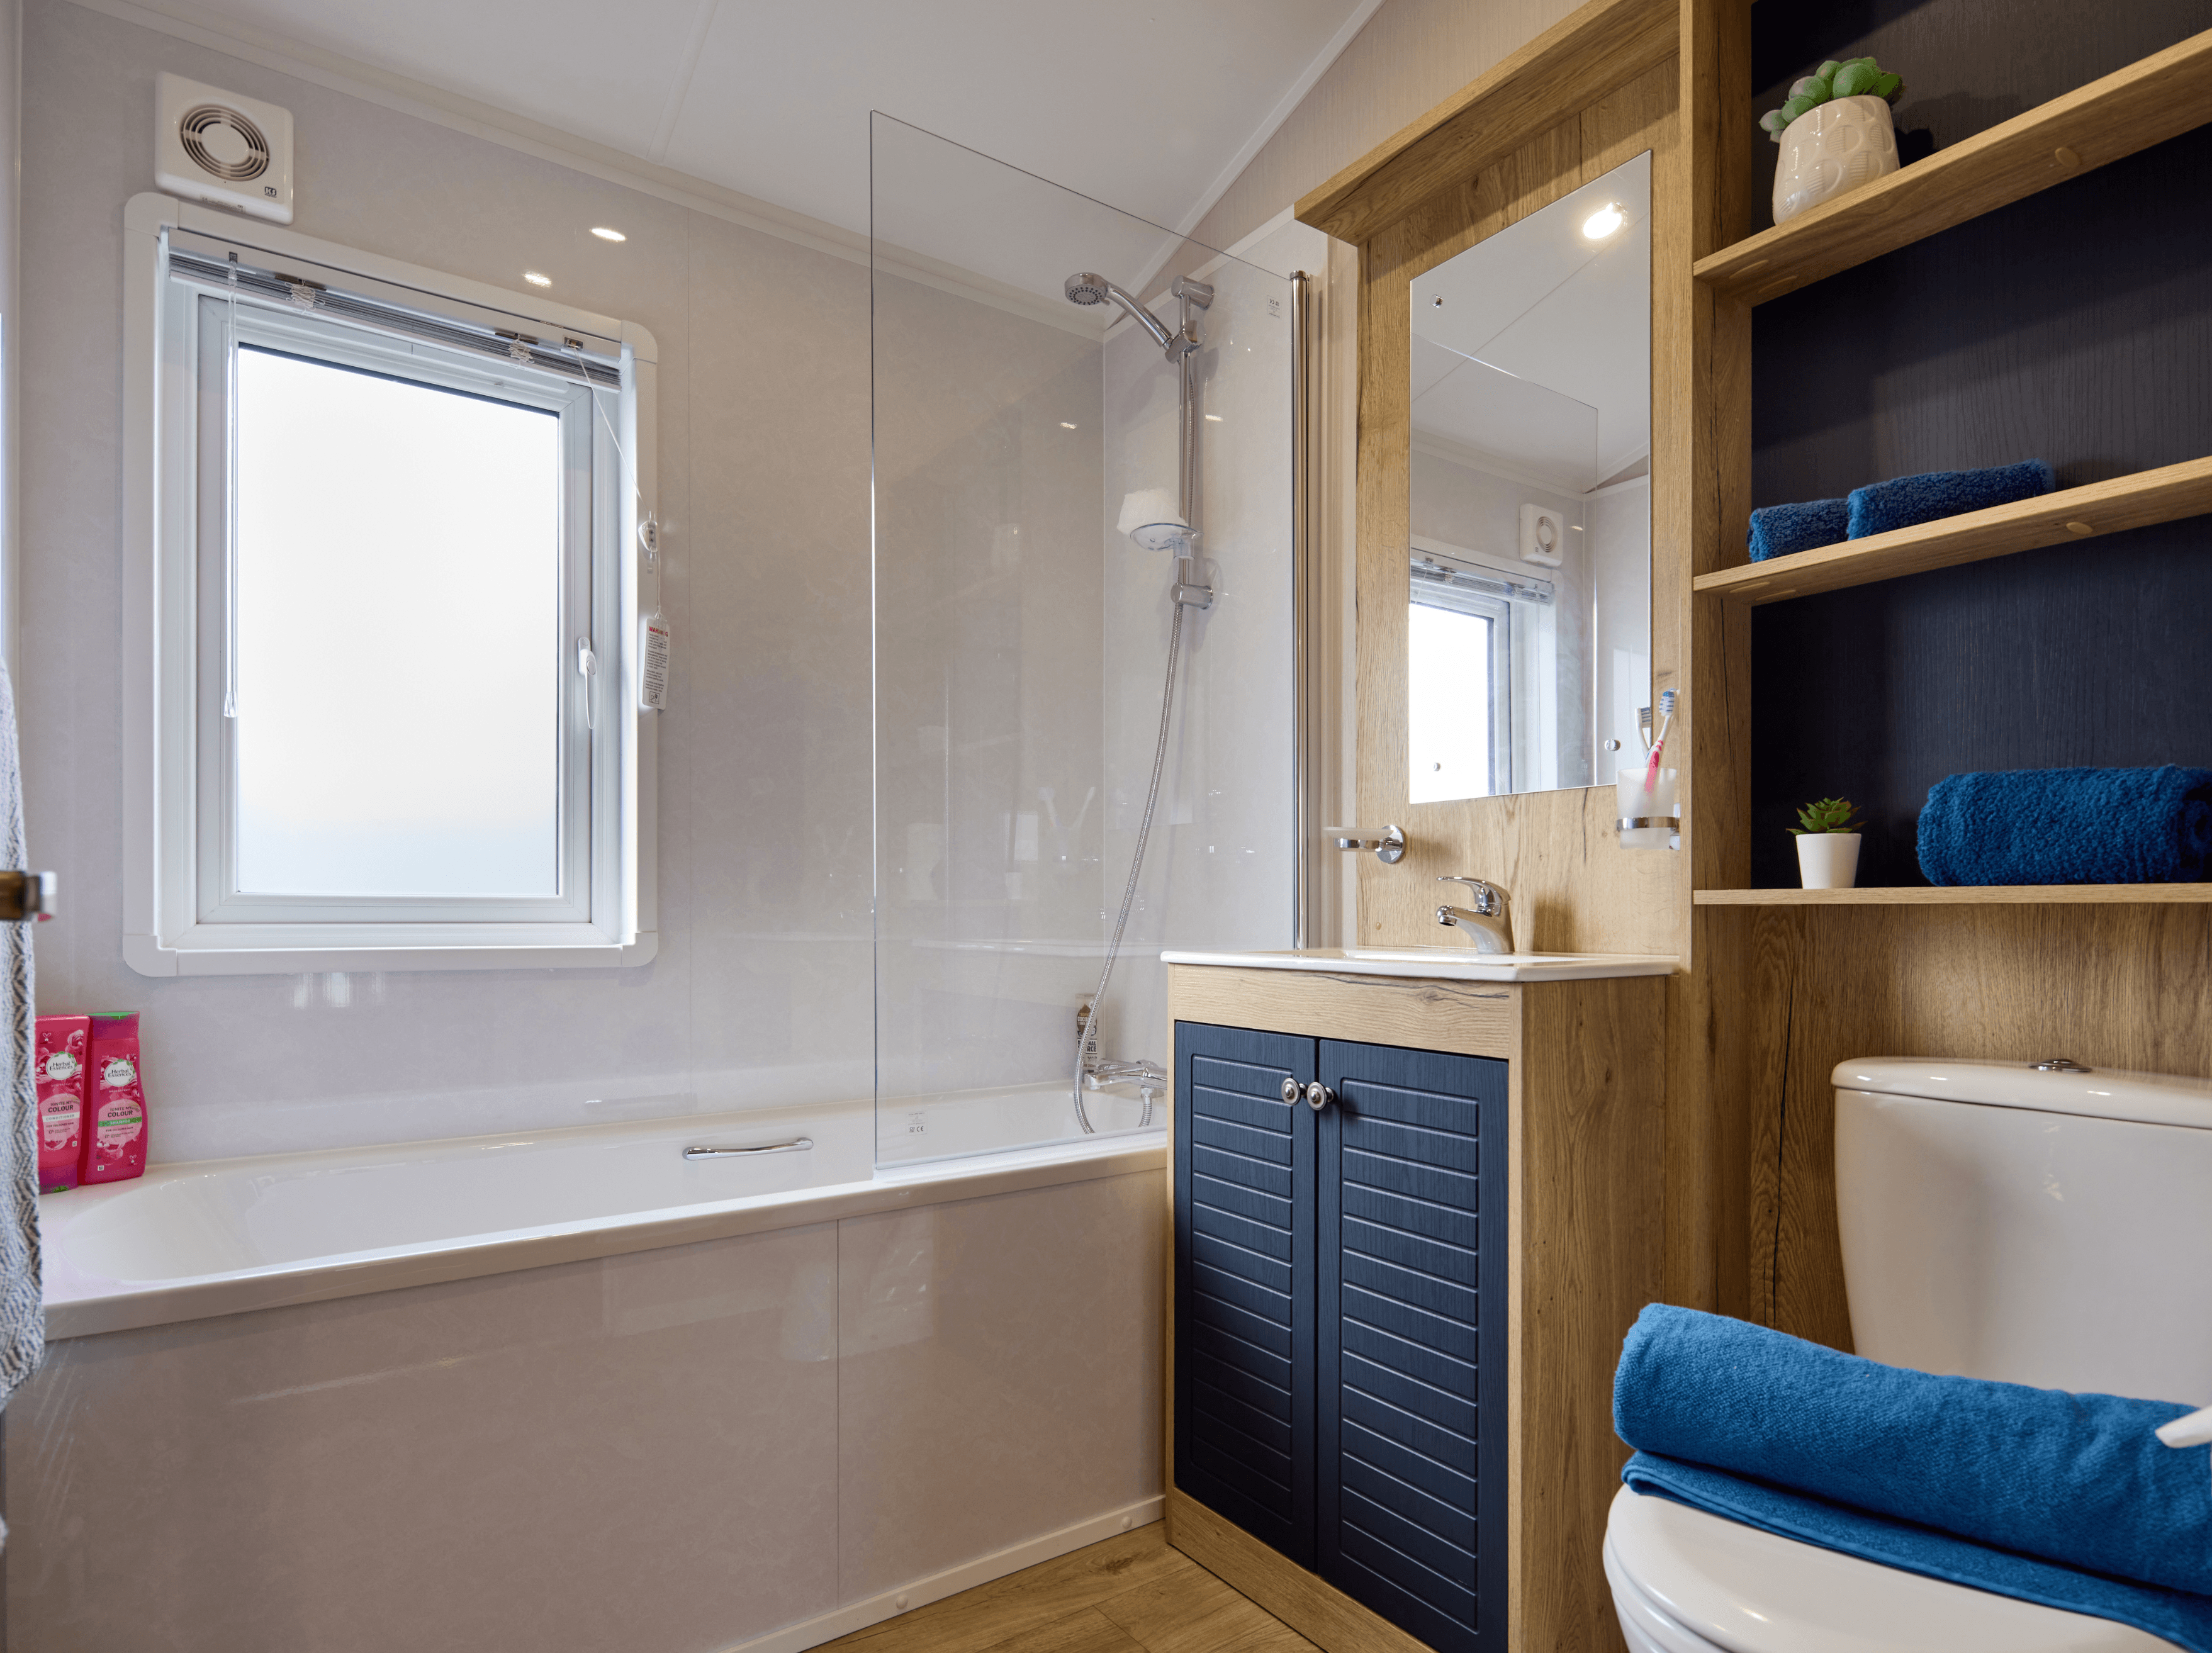 The bathroom in the Willerby New Holland holiday lodge. There is a large bath with shower over and a sink with a large mirror above it. The cupboards and shelves are wood with white walls and dark blue highlights. 